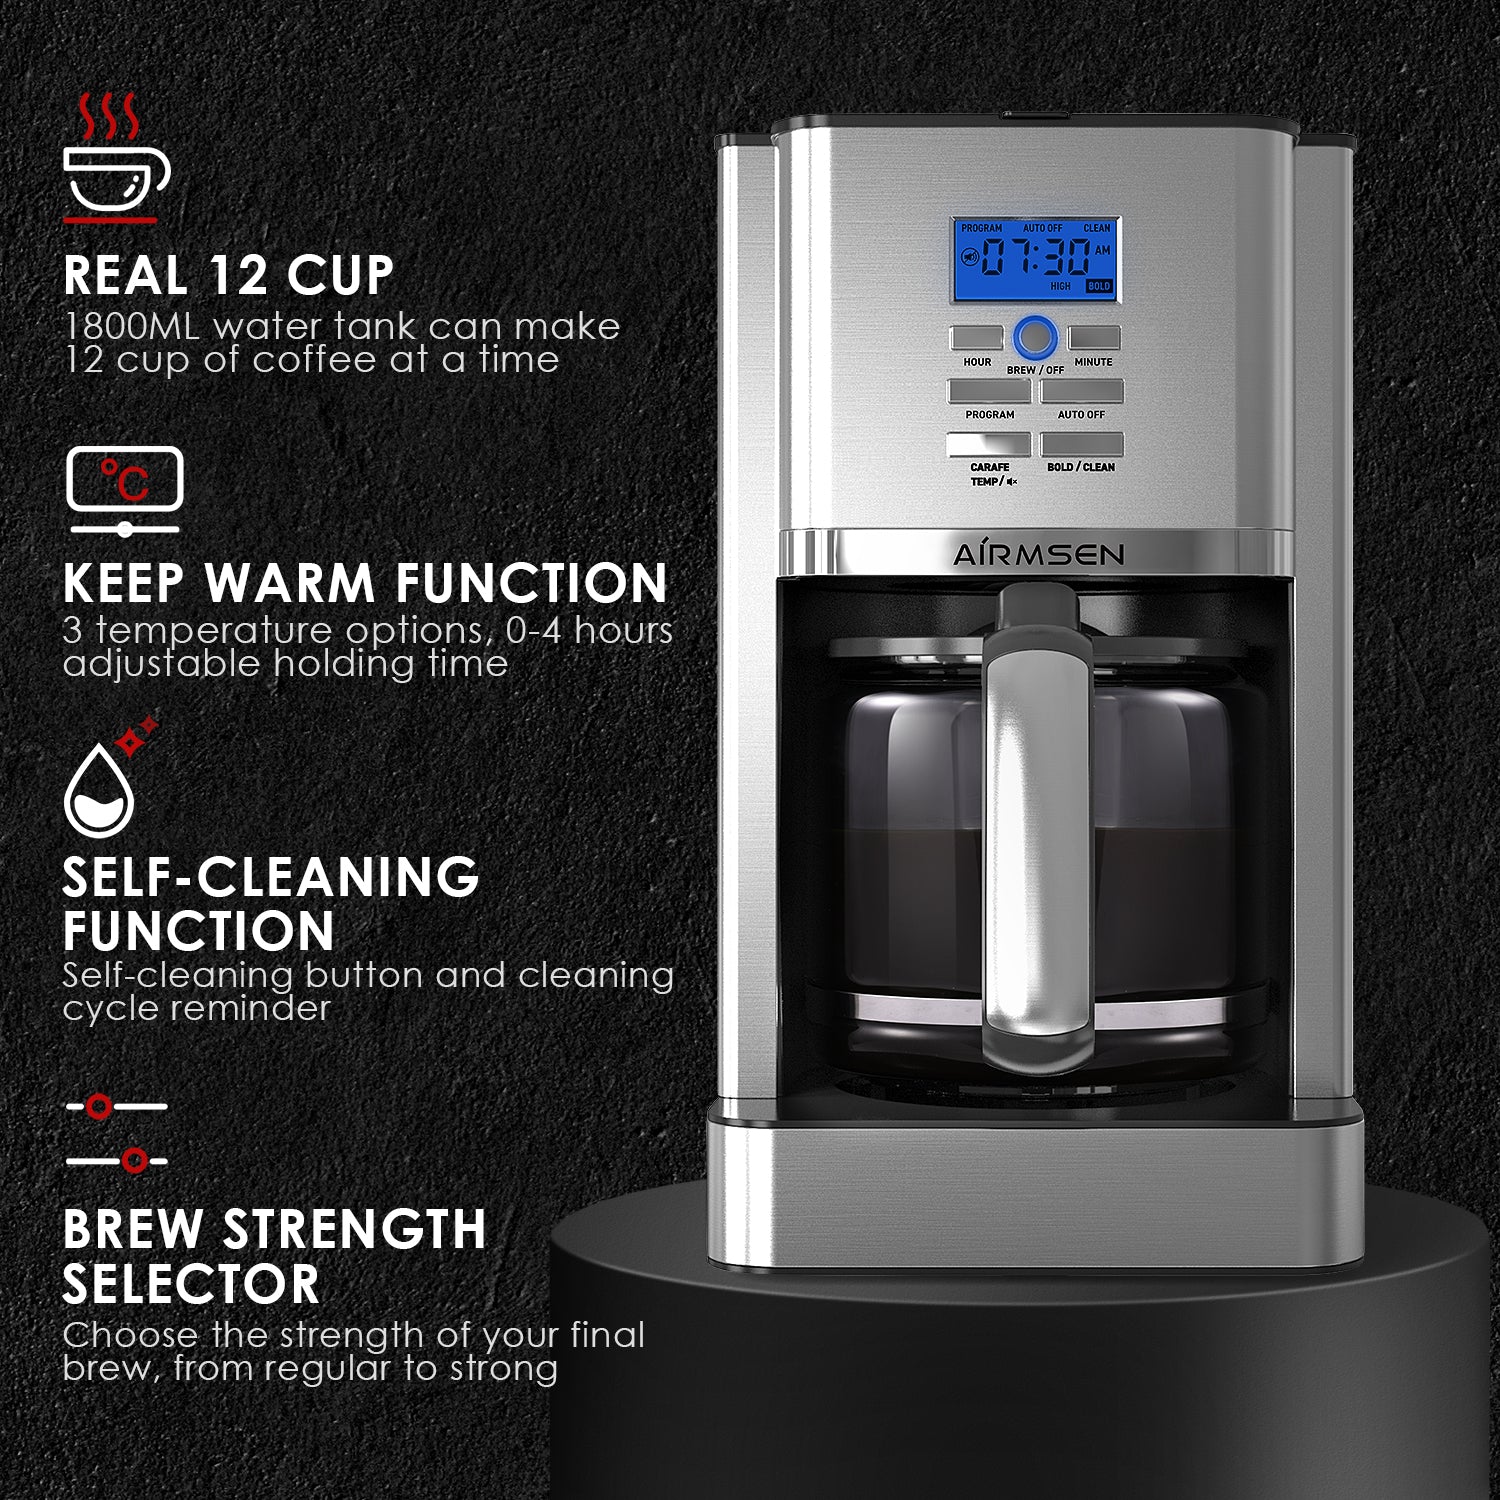 12-Cup Programmable Stainless Steel Drip Coffee Maker with Thermal Carafe